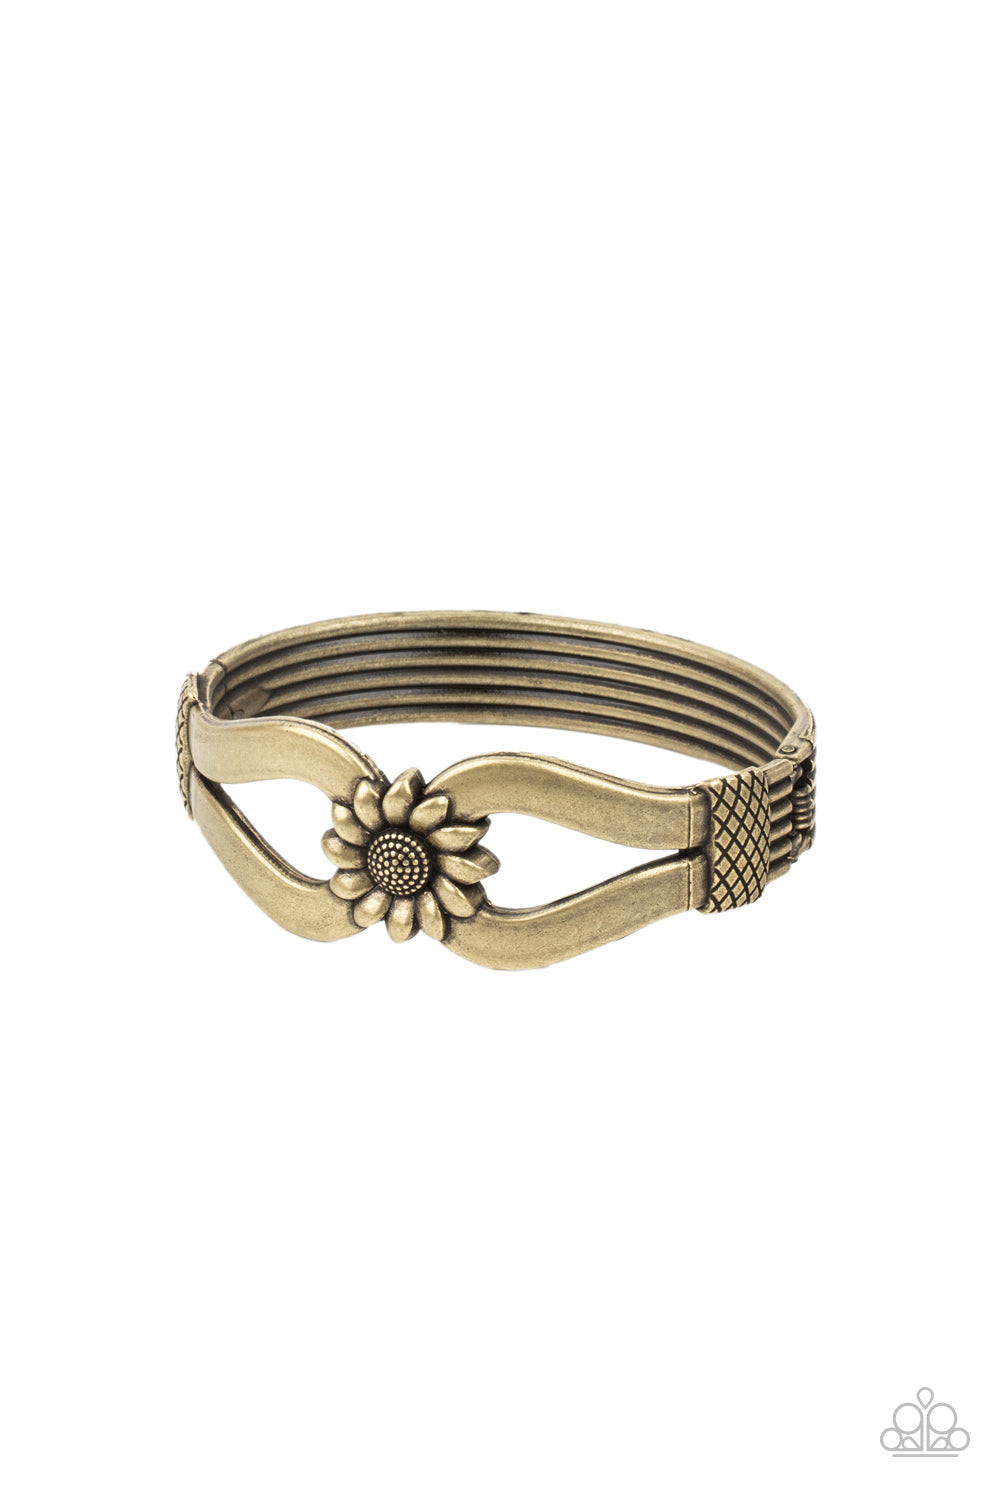 Antiqued brass ribbons loop out from a decorative brass sunflower that attaches to a ribbed brass frame, creating a cuff-like bangle 